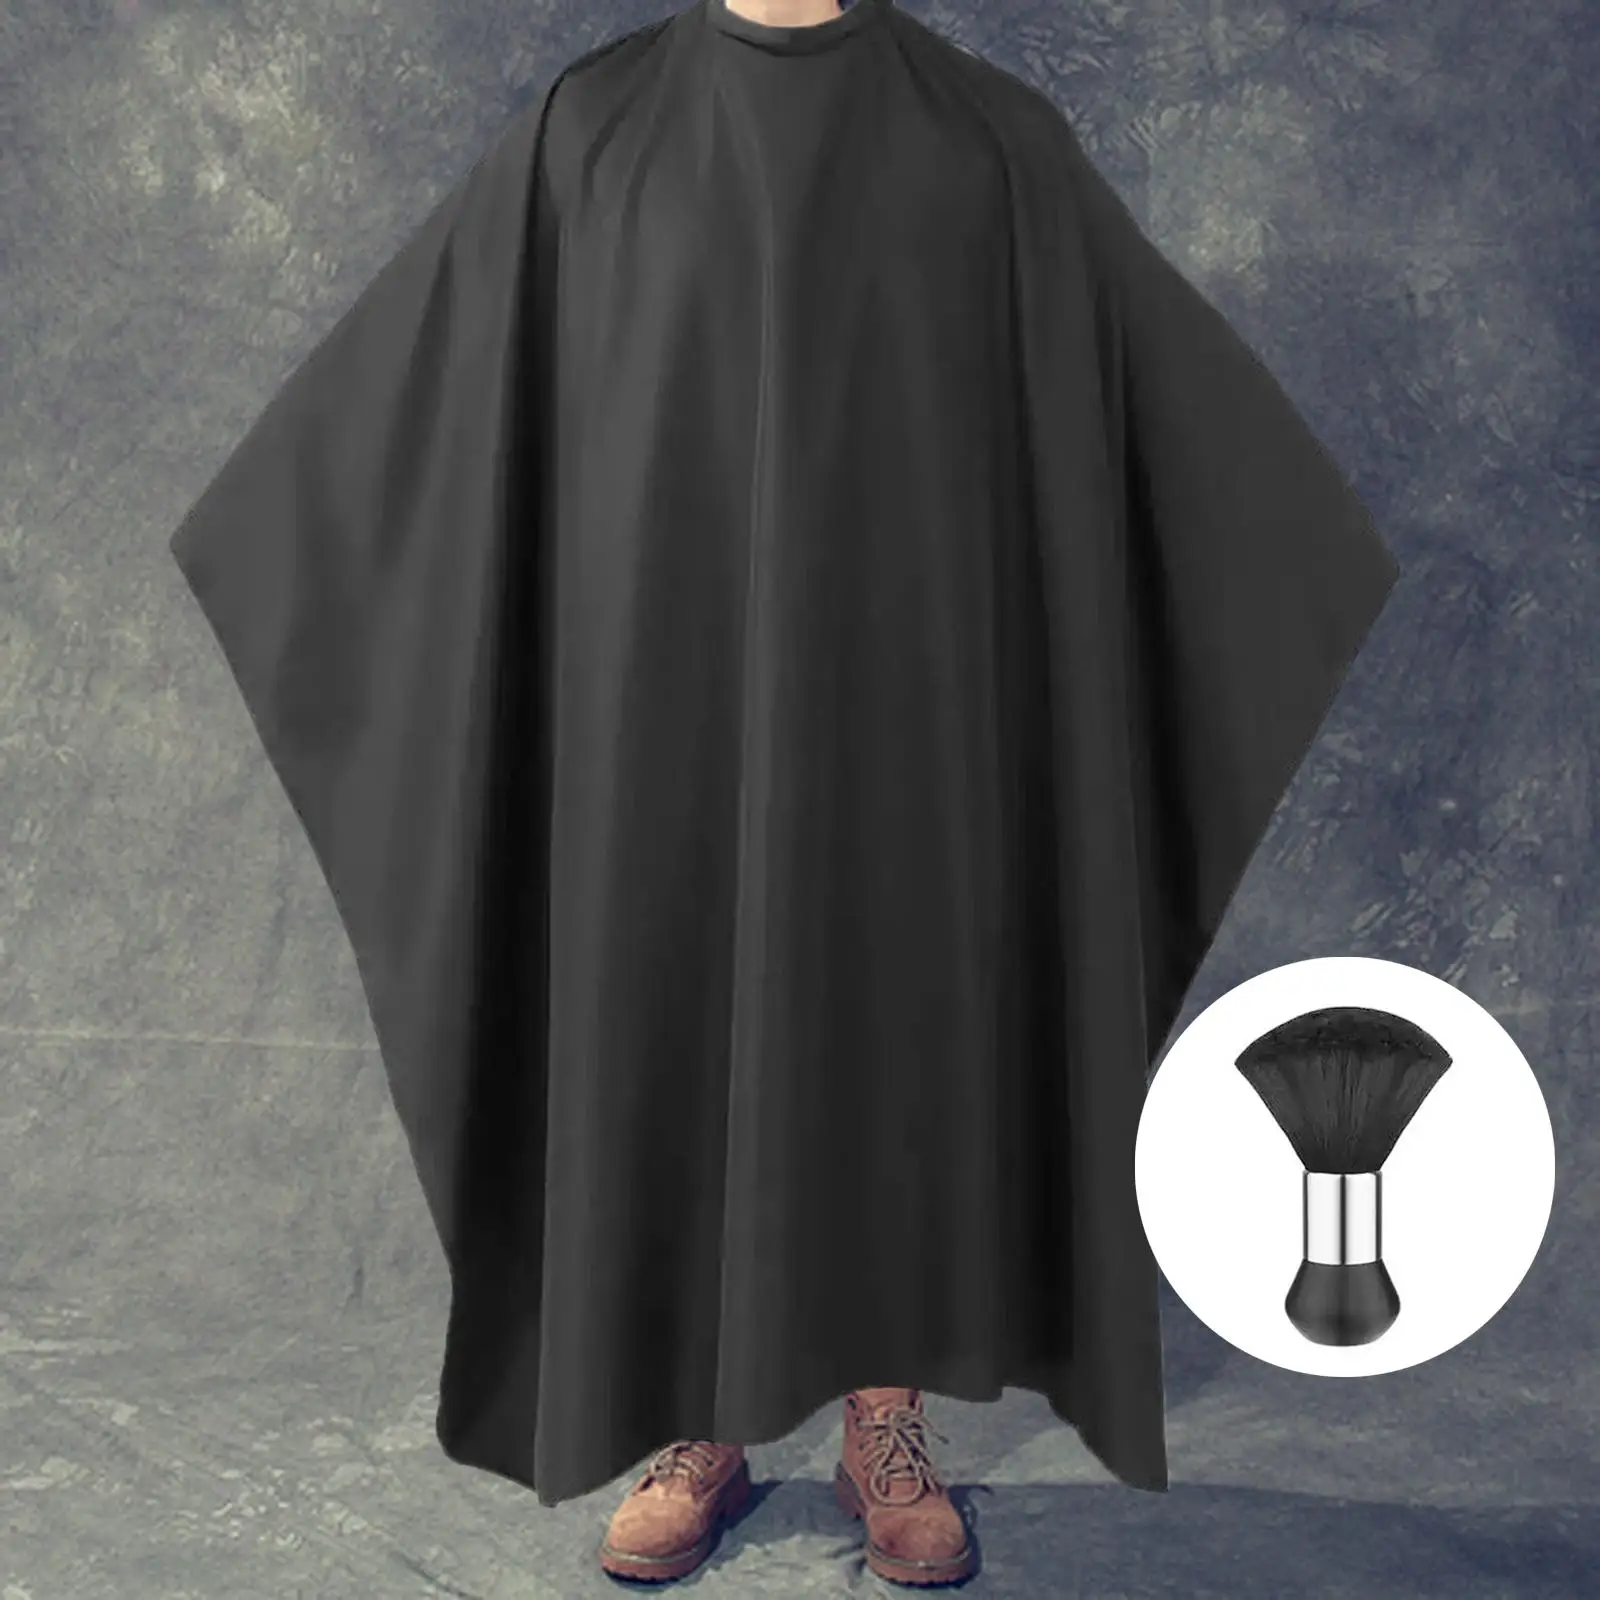 Hair Cutting Salon Cape Water Resistant Black Hairdresser Cape for Men Women and Children Hairdressing Cosmetology Supplies